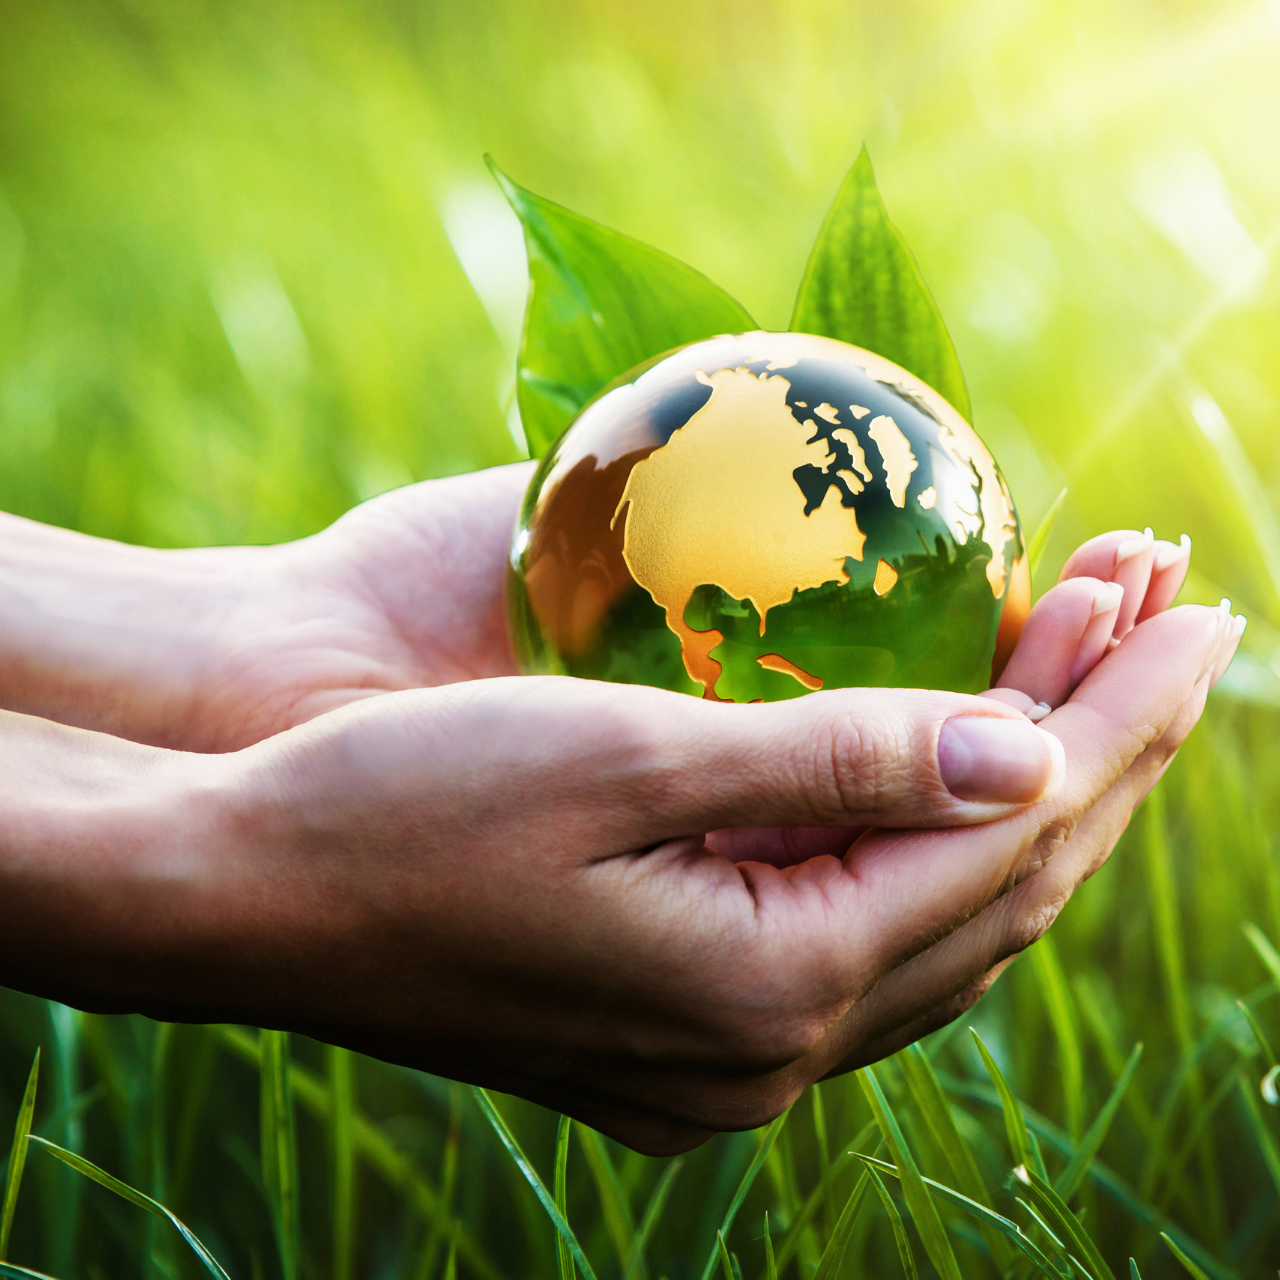 World Environment Day 2021: Know Date, Theme, and Objective behind celebrating this Day